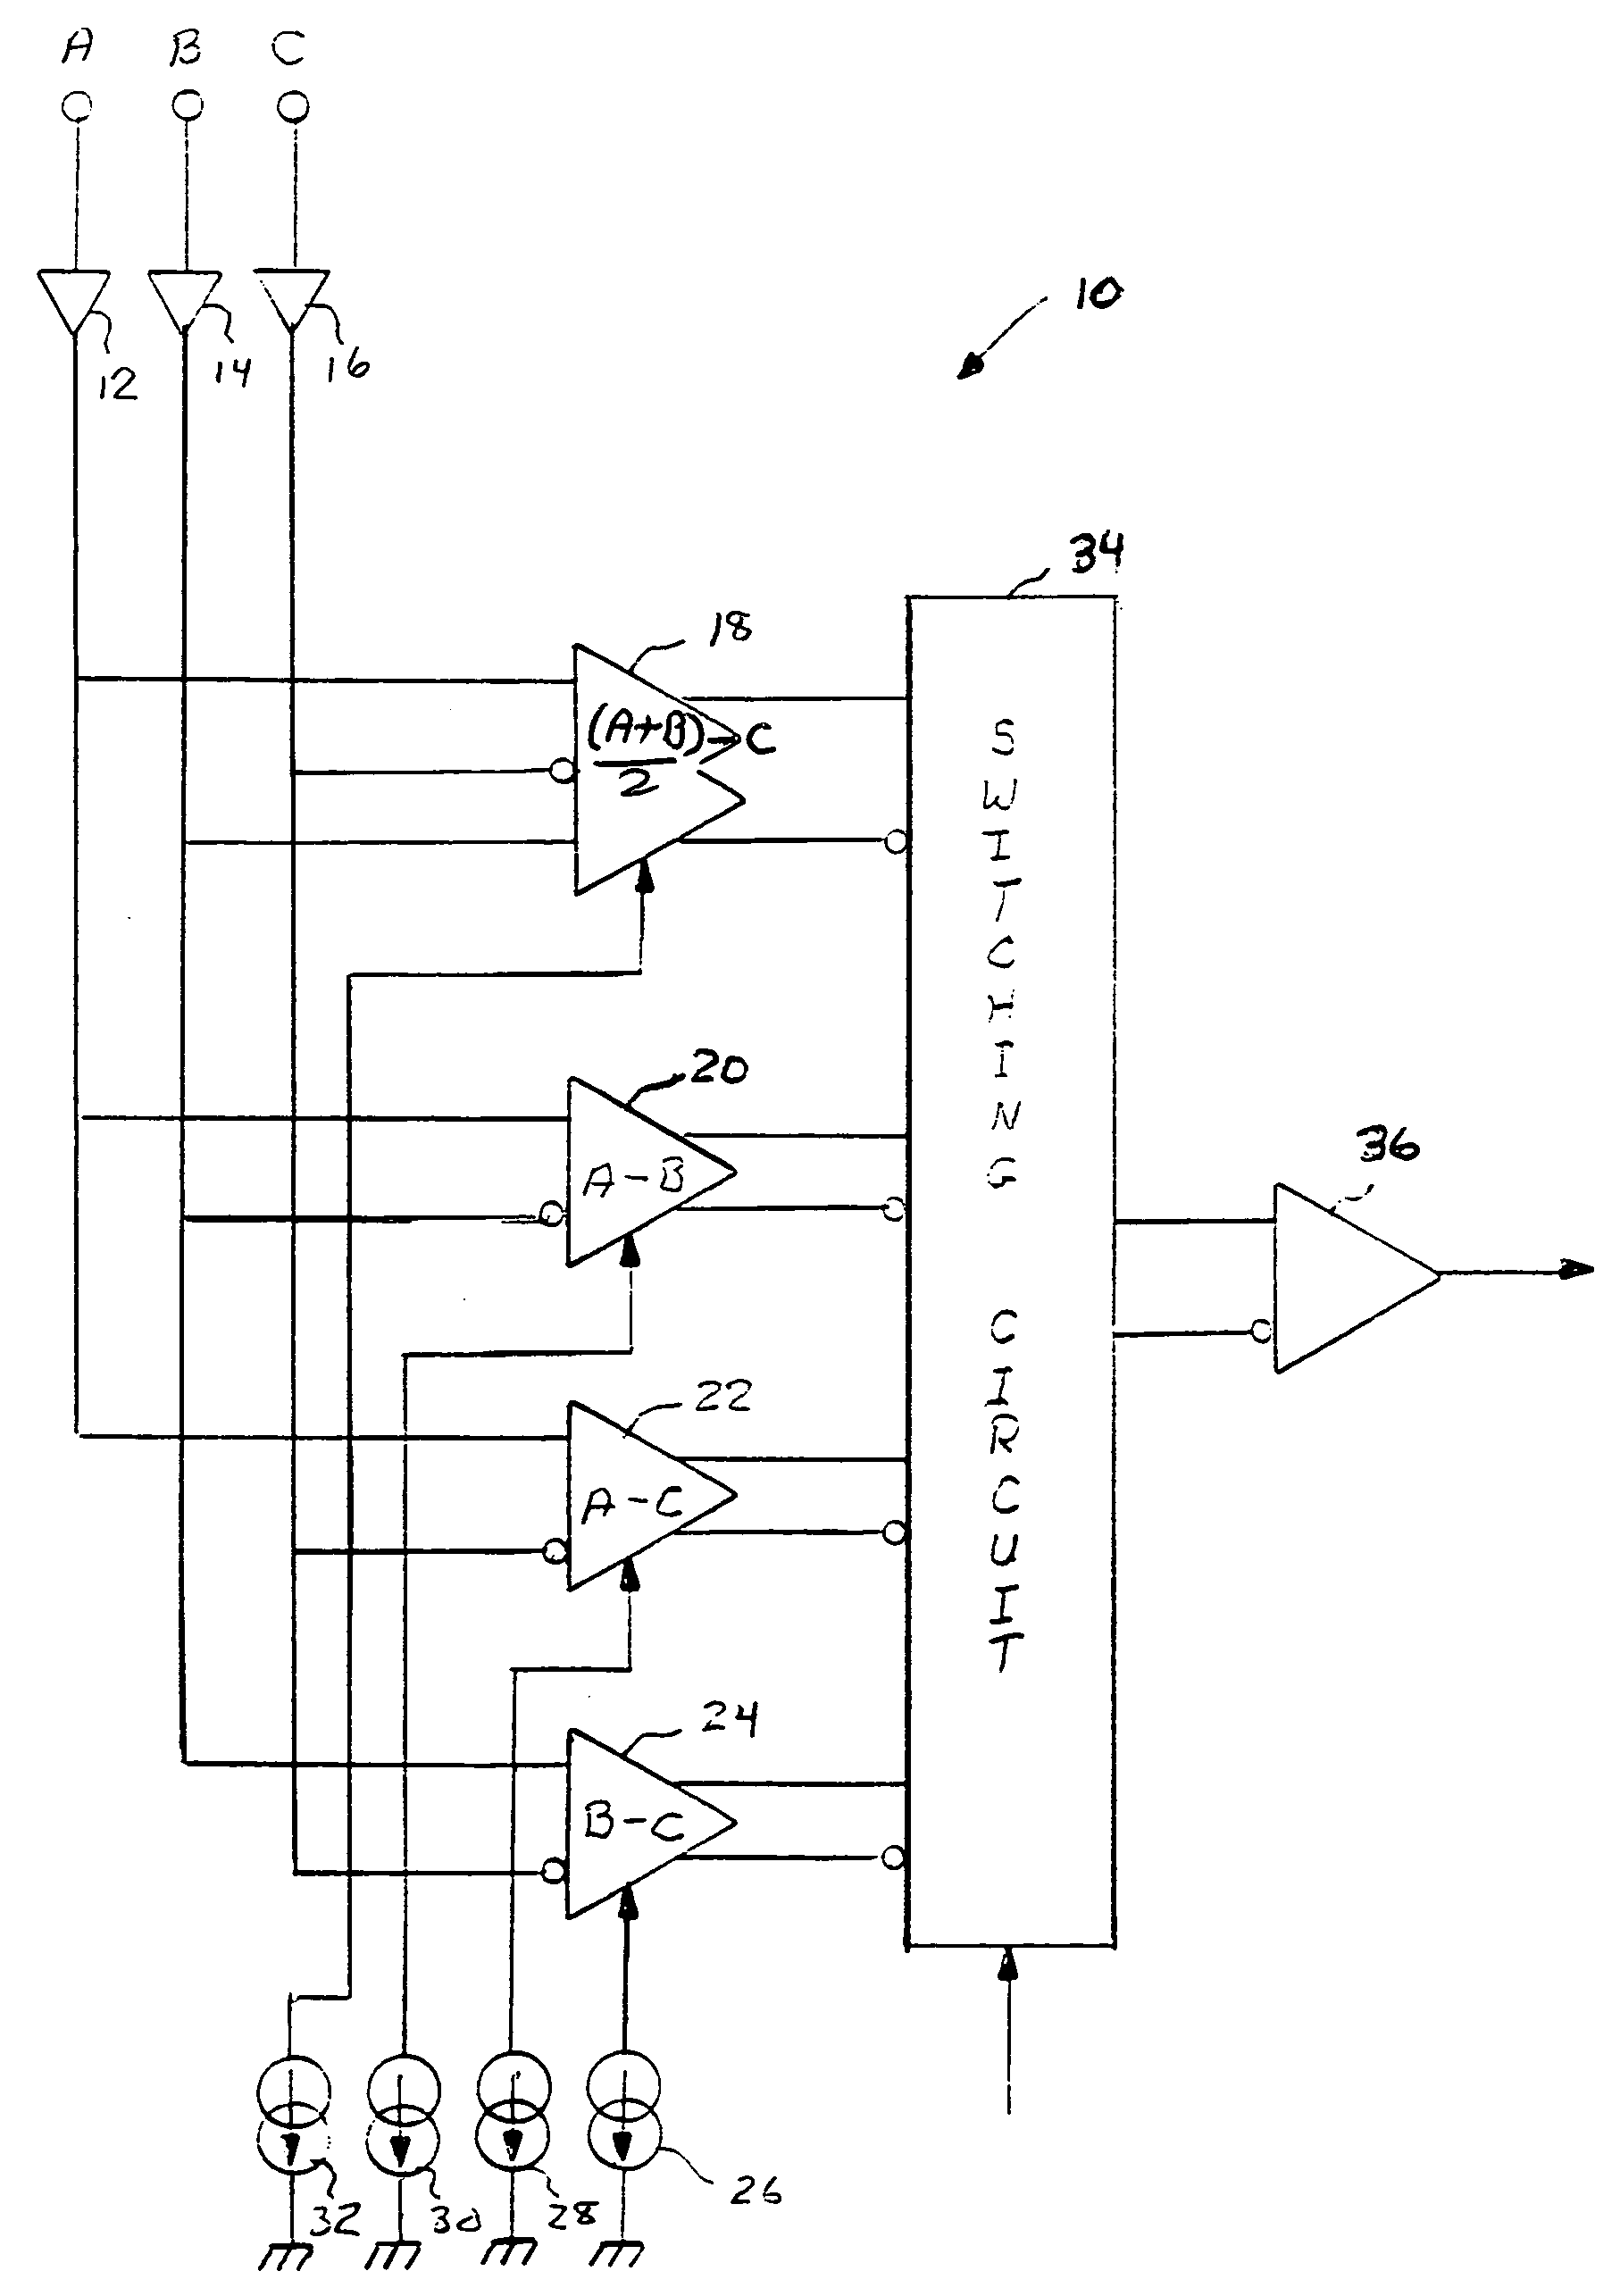 Mode selection amplifier circuit usable in a signal acquisition probe